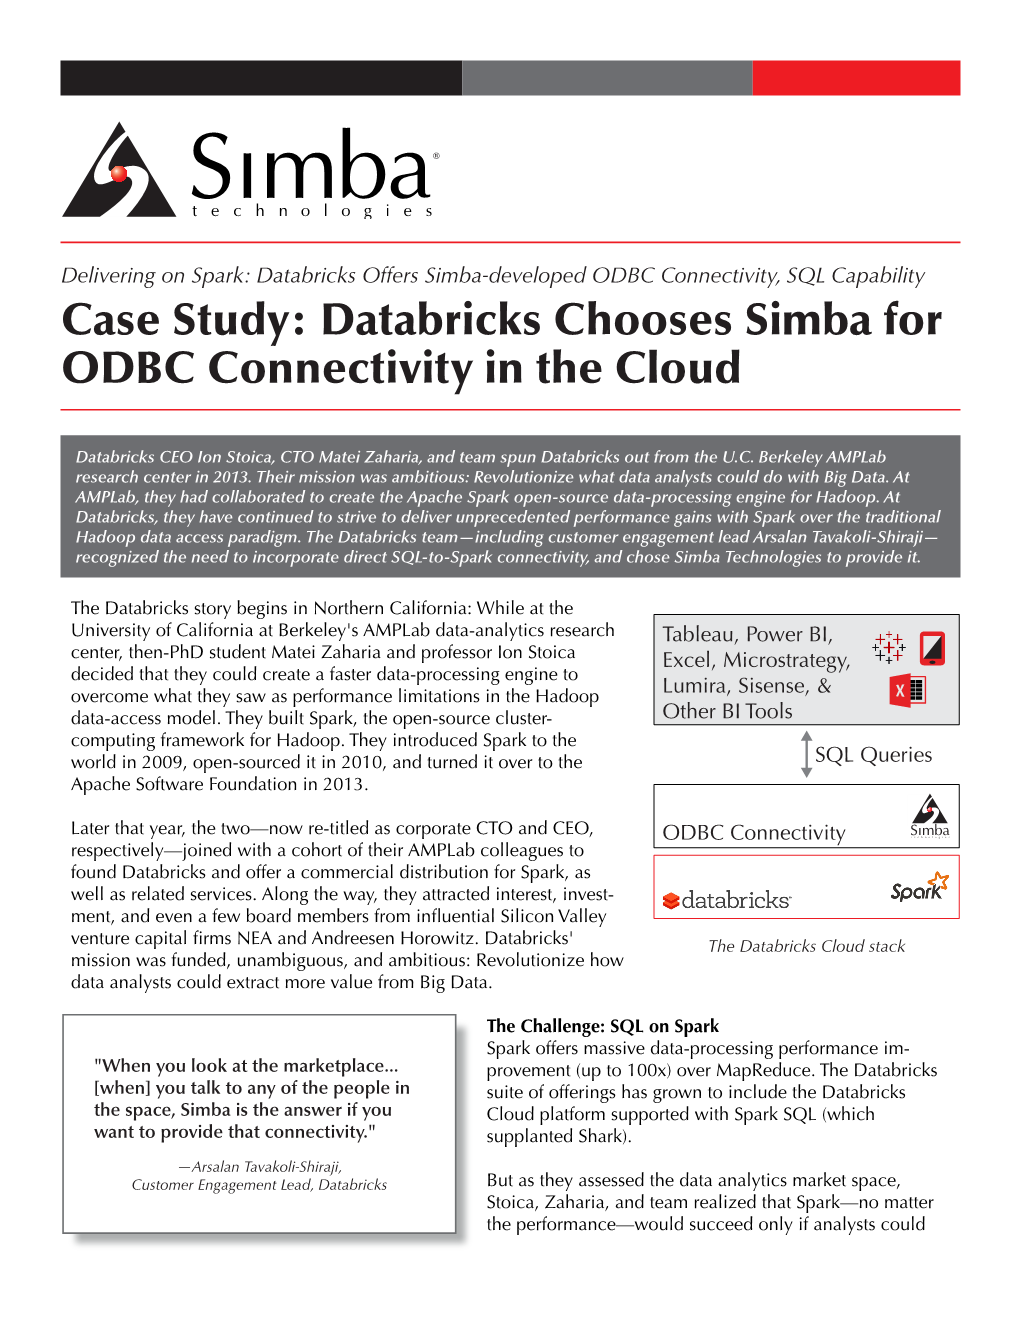 Databricks Chooses Simba for ODBC Connectivity in the Cloud